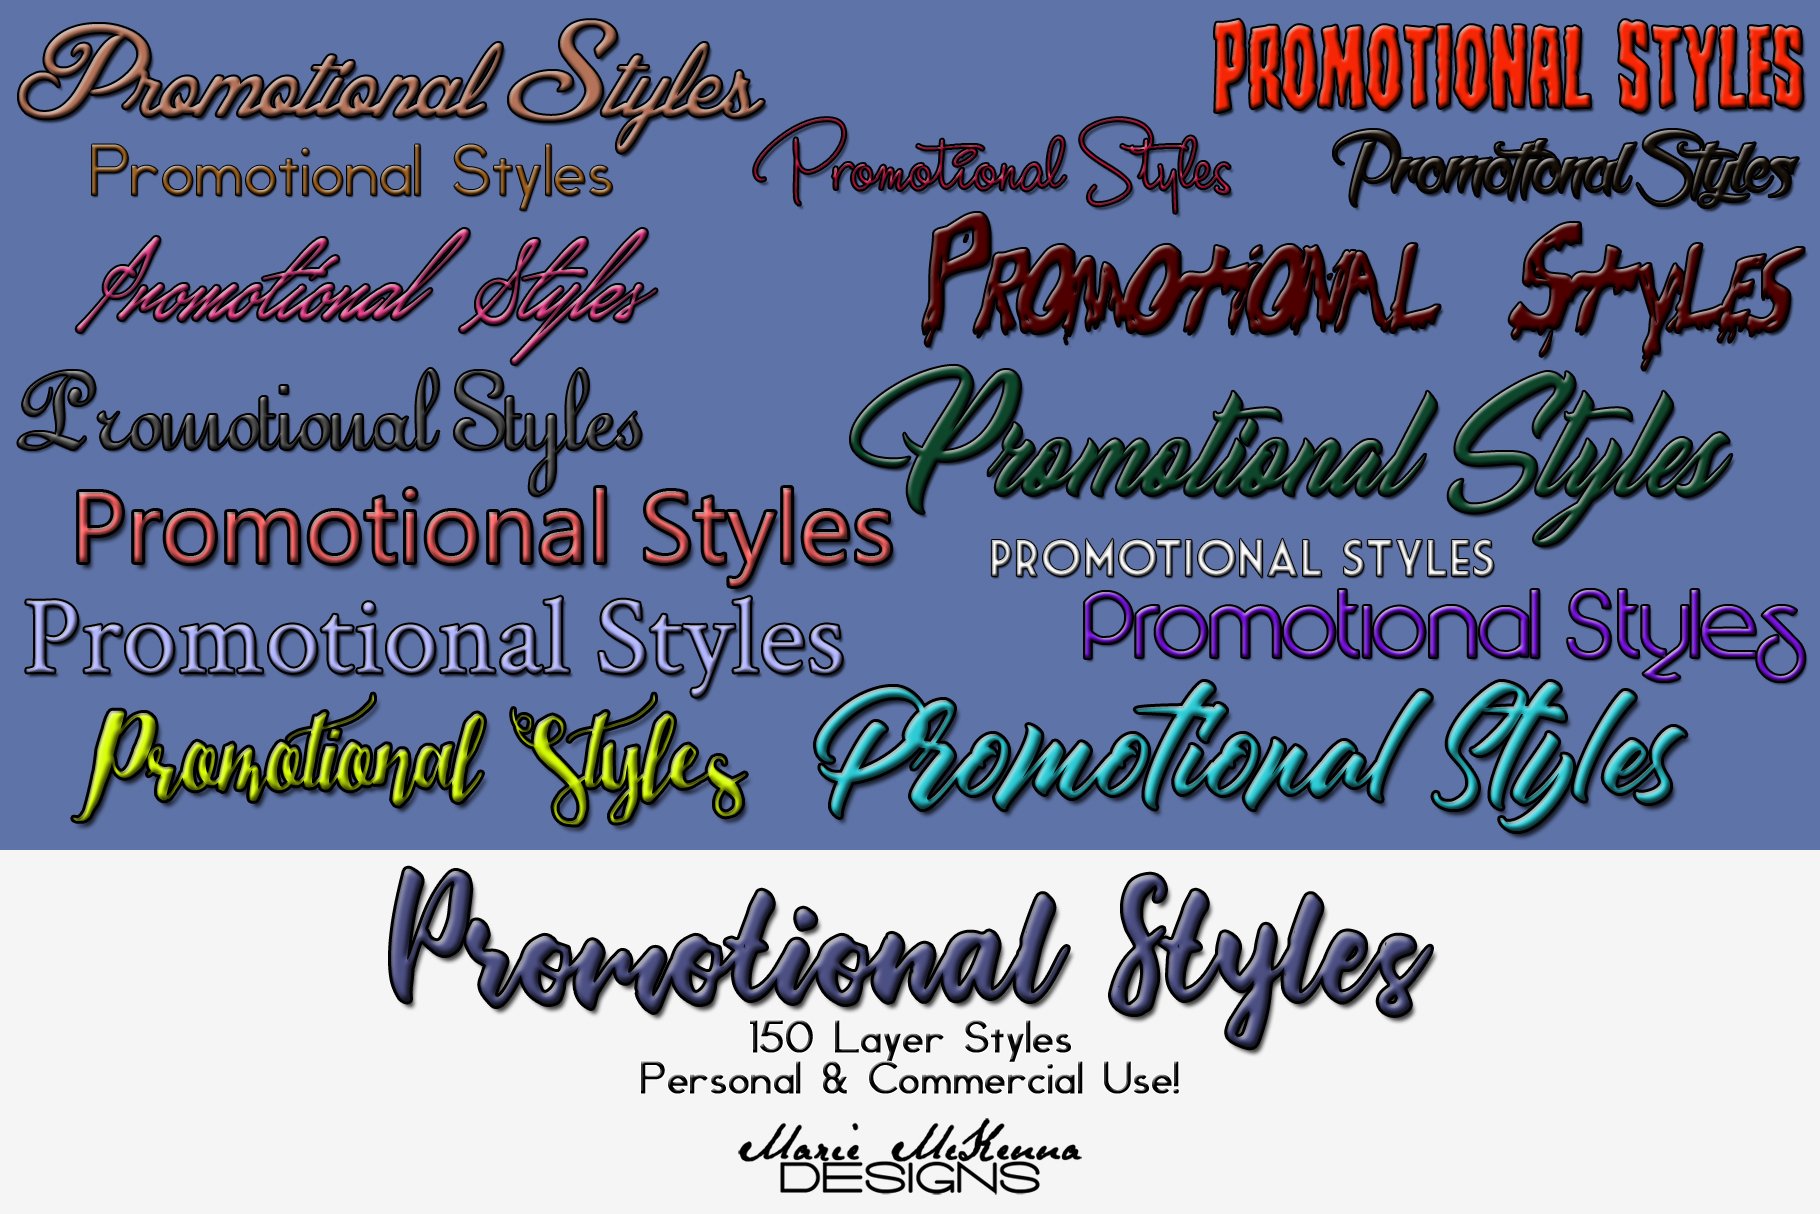 Promotional Stylescover image.